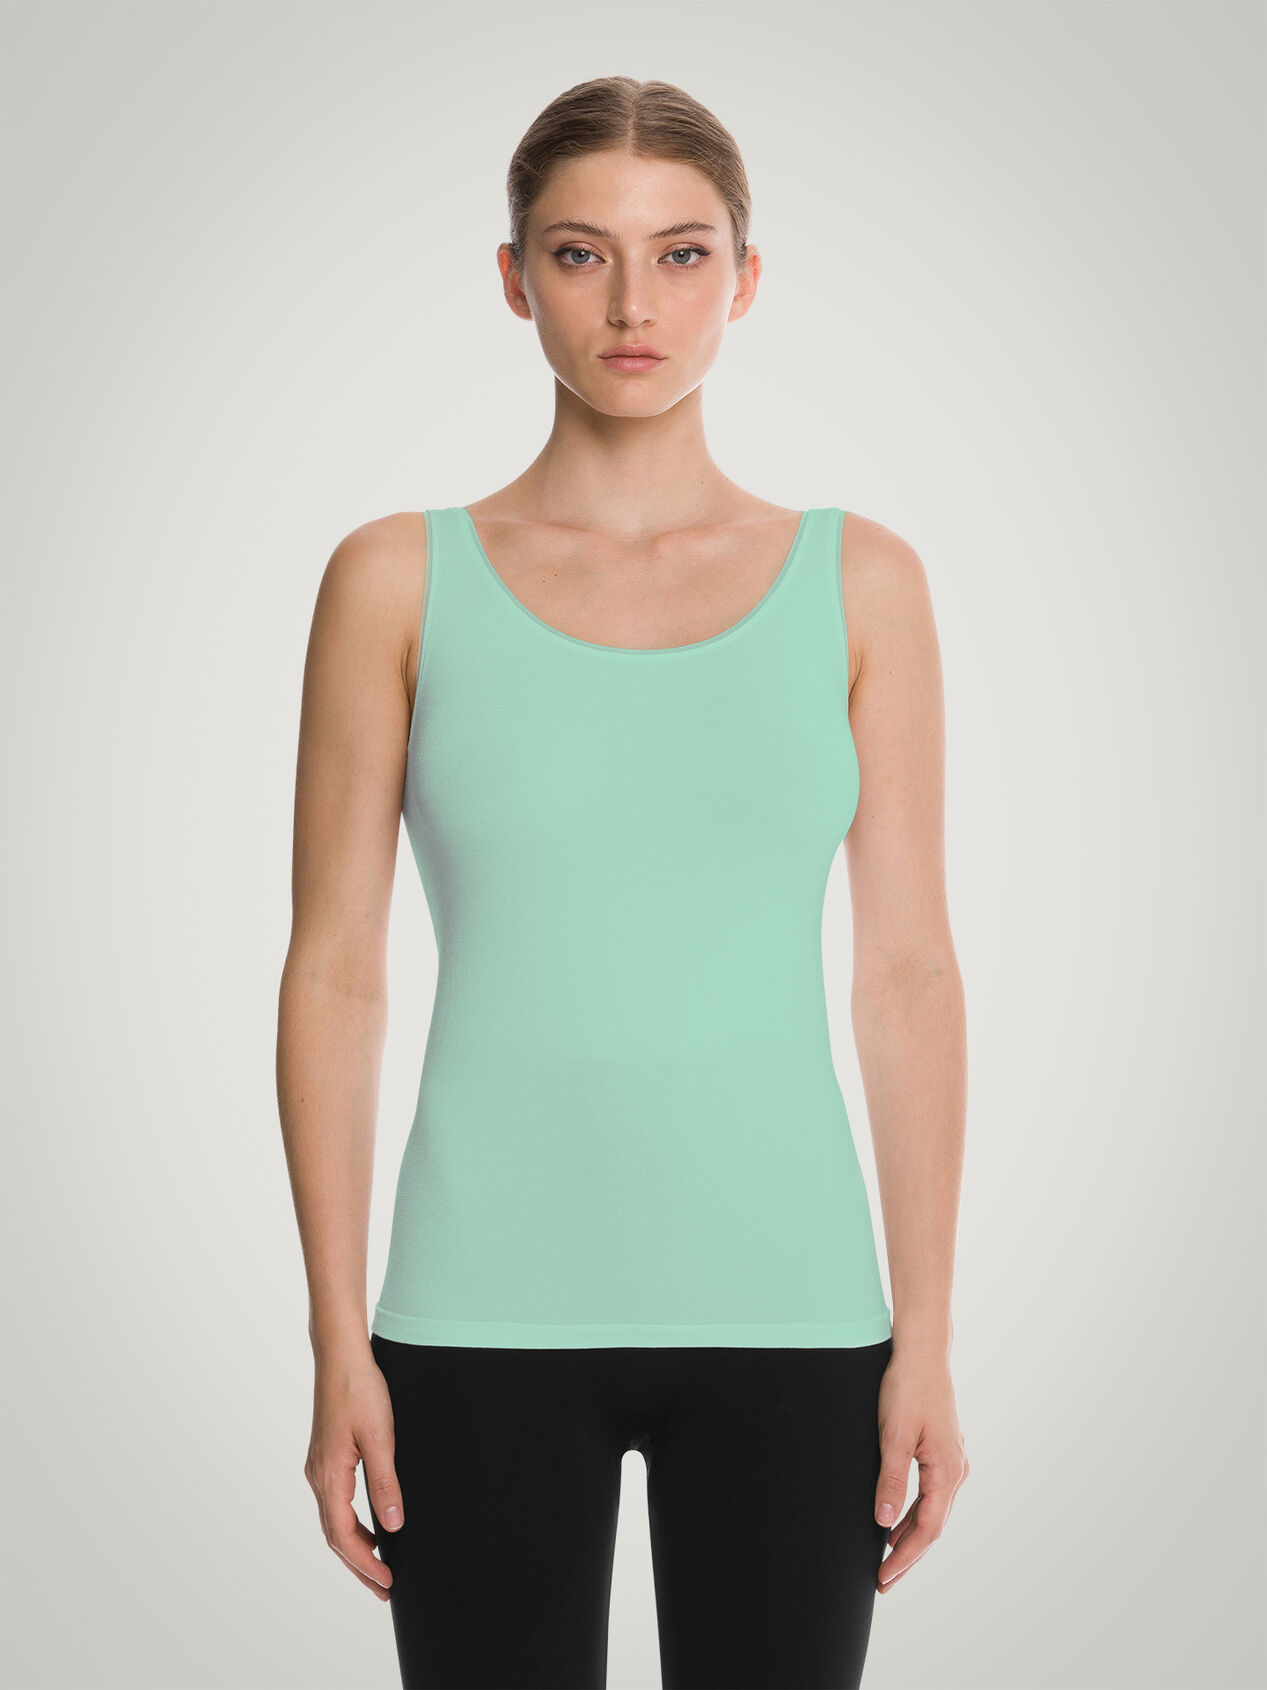 purchases cheapest NWT Wolford Jamaica Tank Top